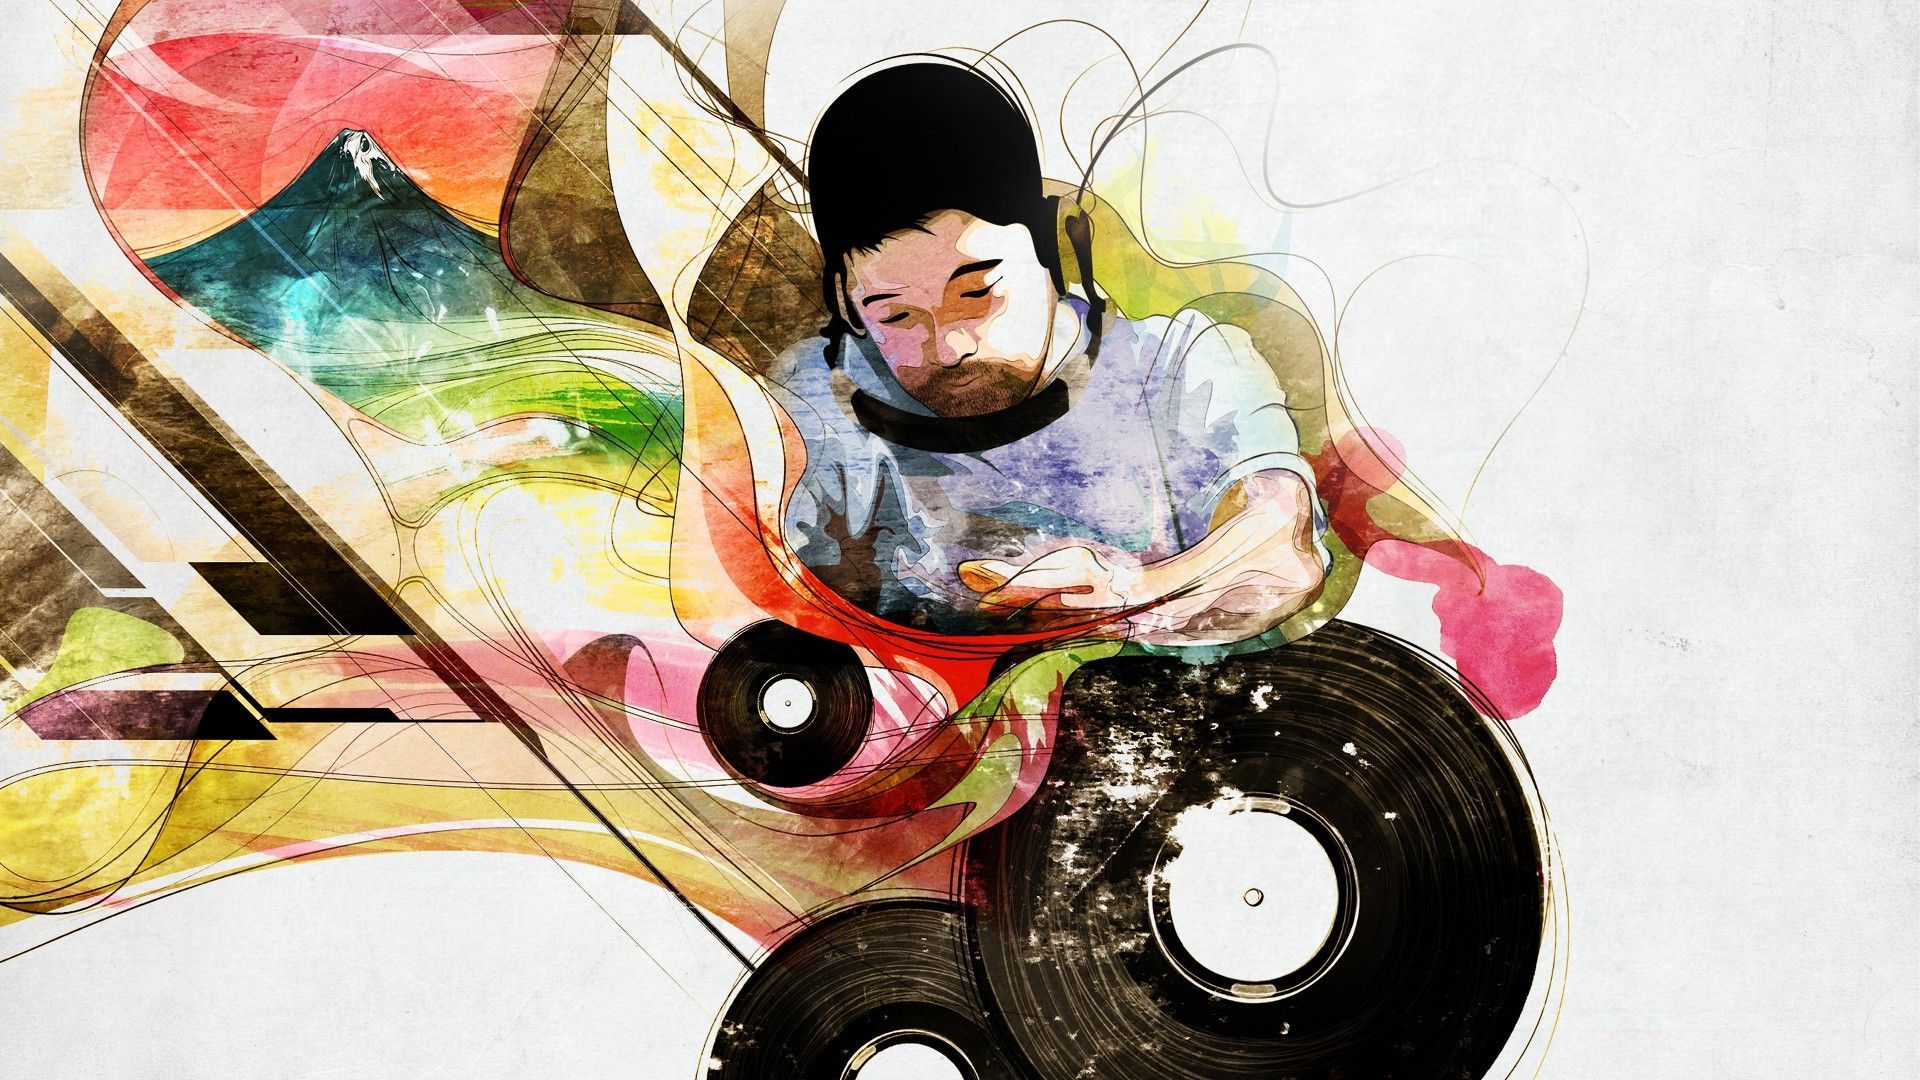 Nujabes #19